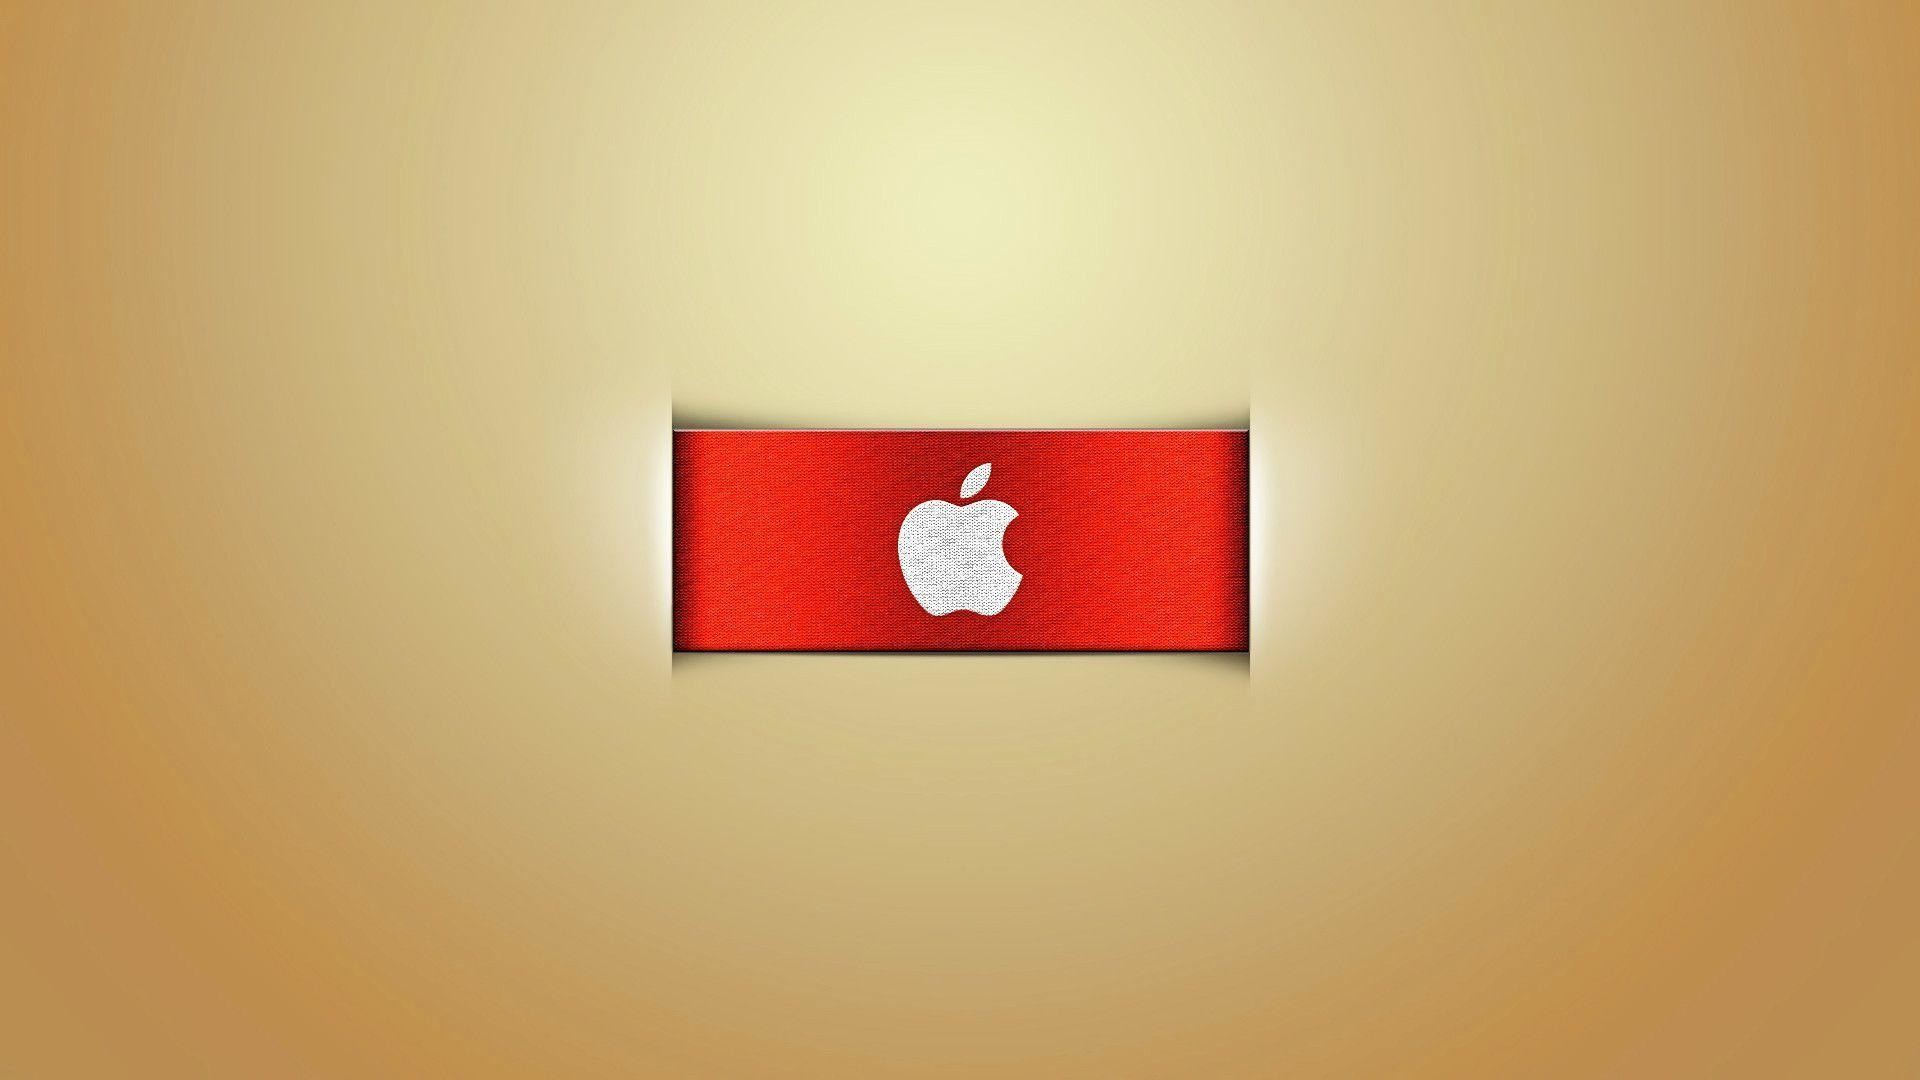 1920x1080 Wallpapers For > Red Apple Logo Wallpaper